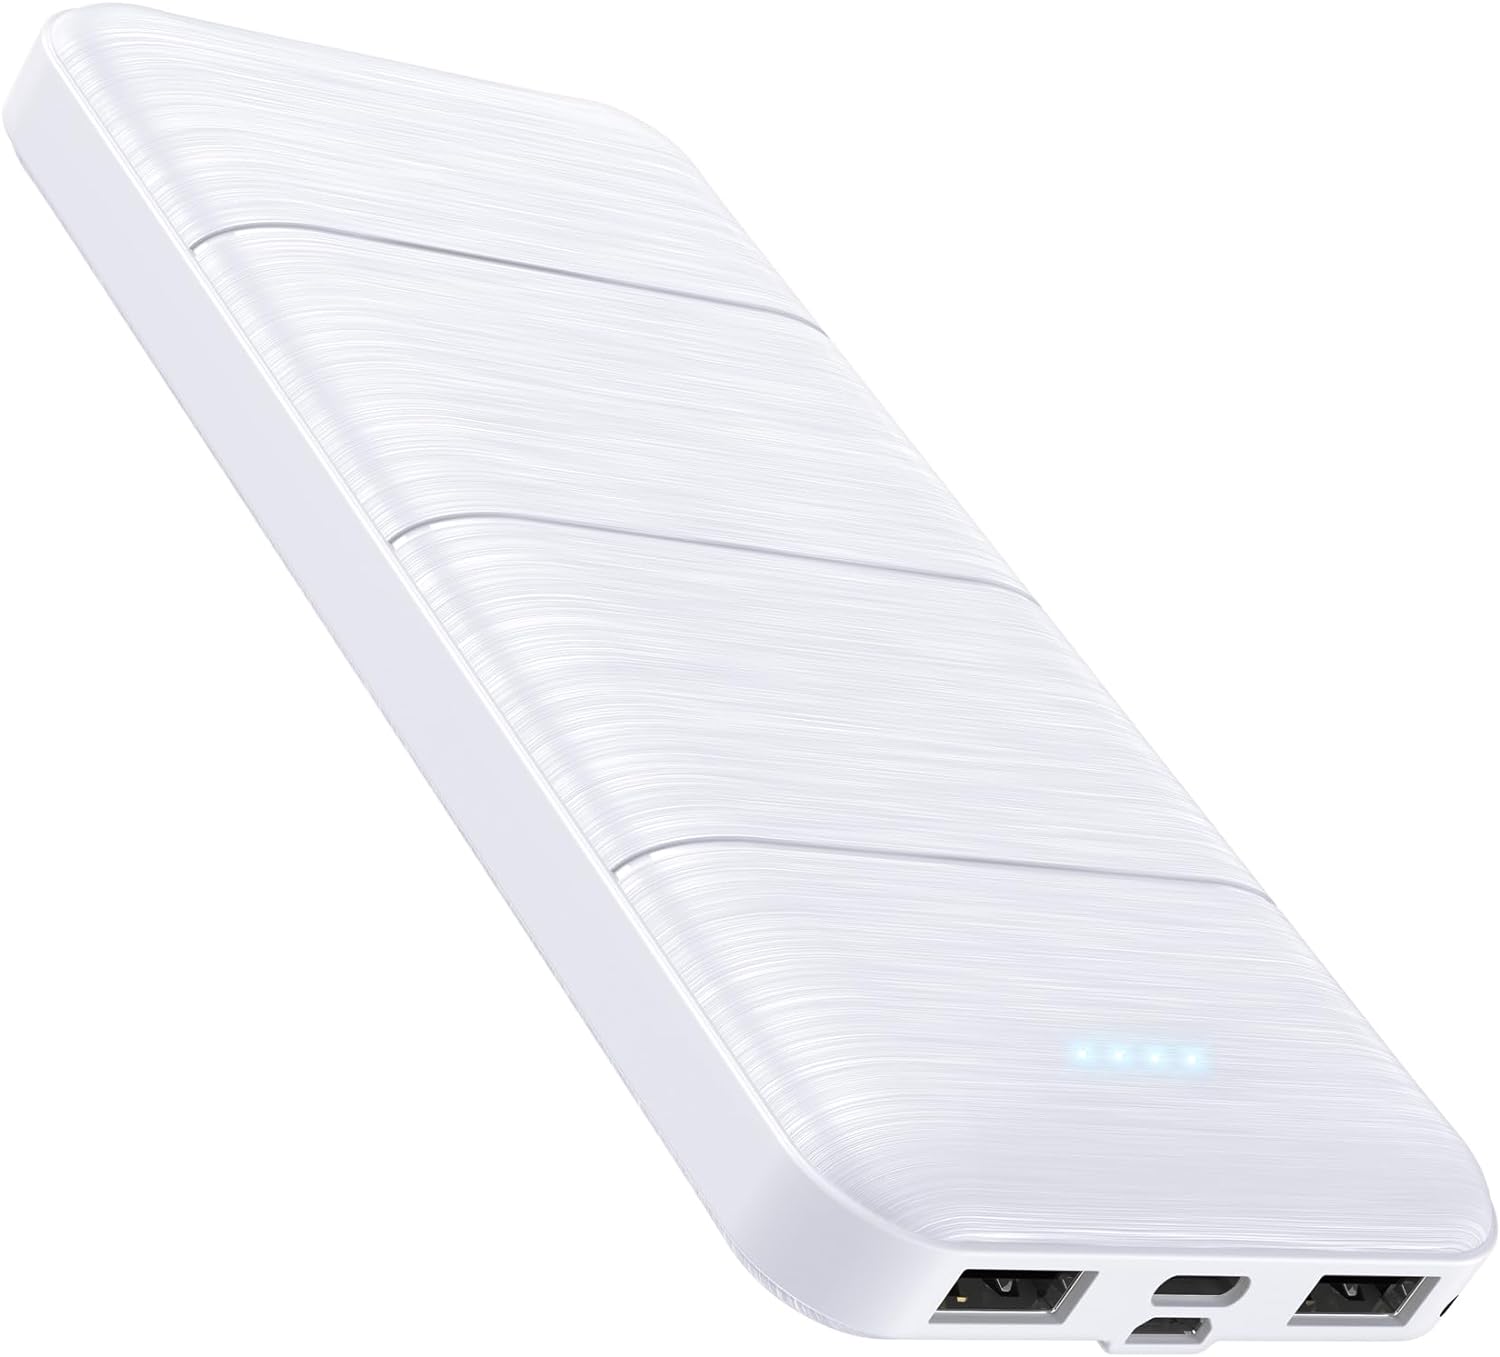 Portable-Charger-Power-Bank - 15000mAh Dual USB Power Bank Output 5V3.1A Fast Charging Portable Charger Compatible with Smartphones and All USB Devices(White)